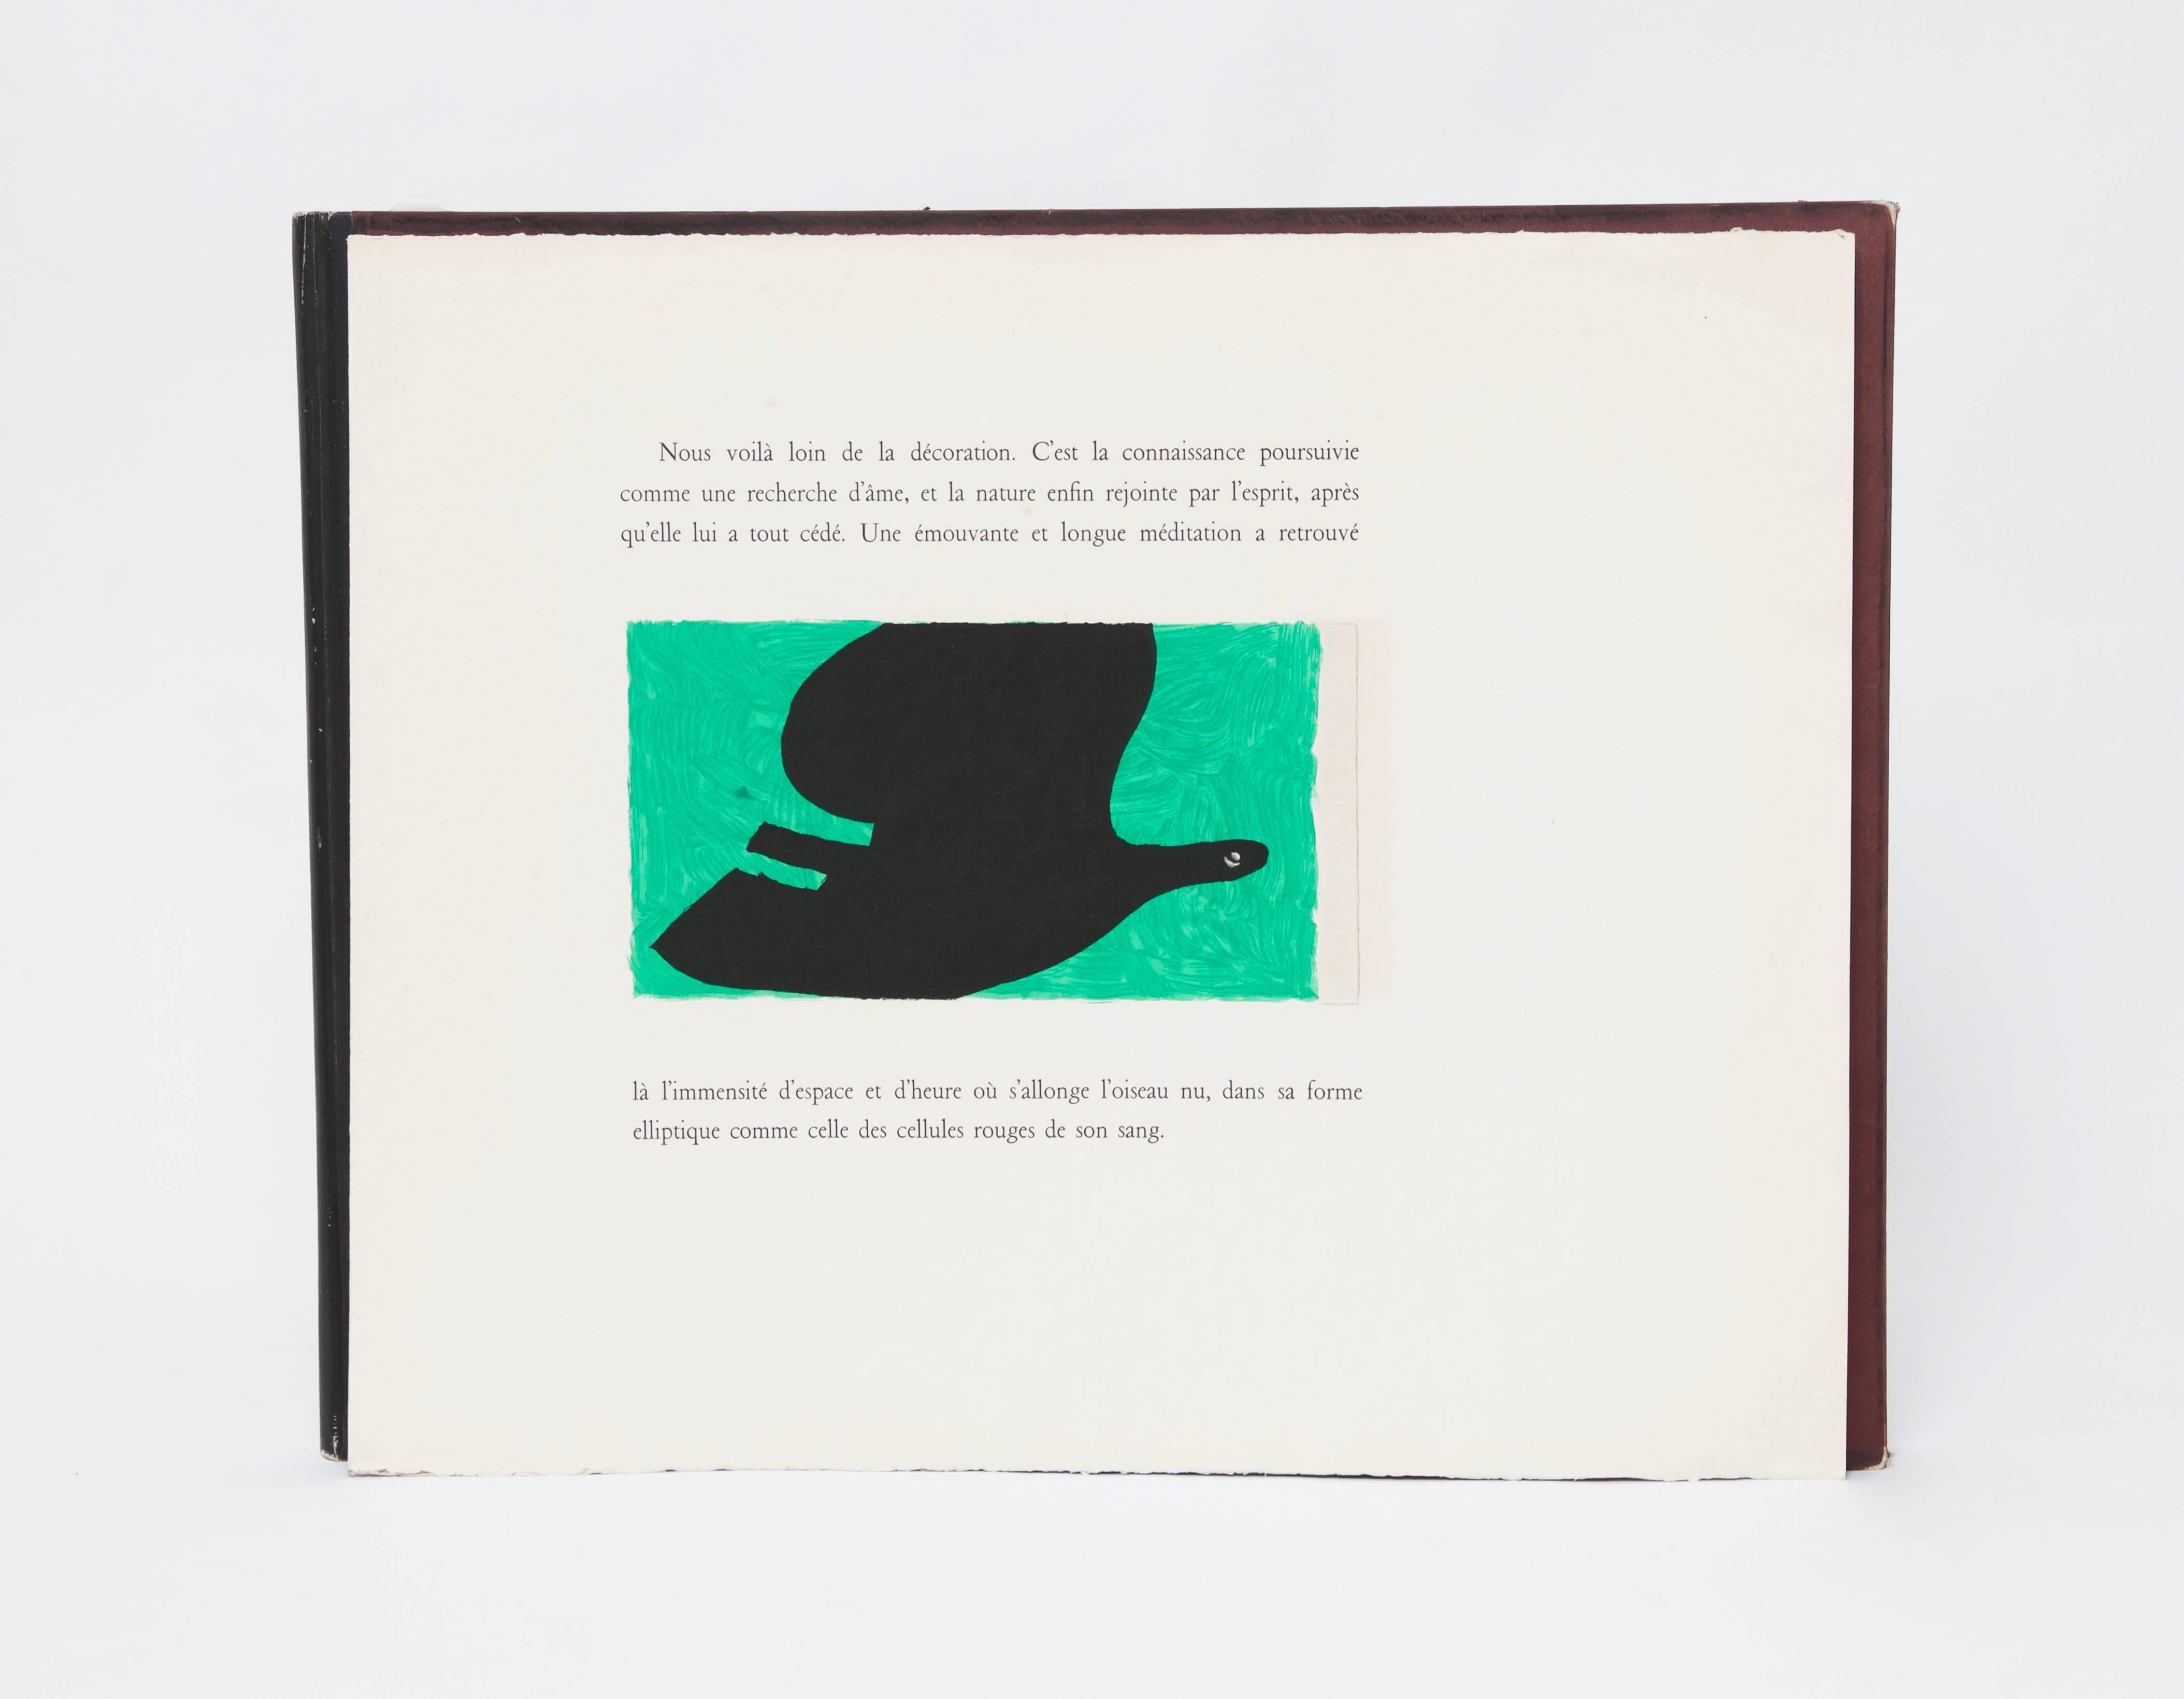 Modern 1957-1962, Rare Georges Braque 'Au Vent d'Arles' Archive Books and Lithographs For Sale